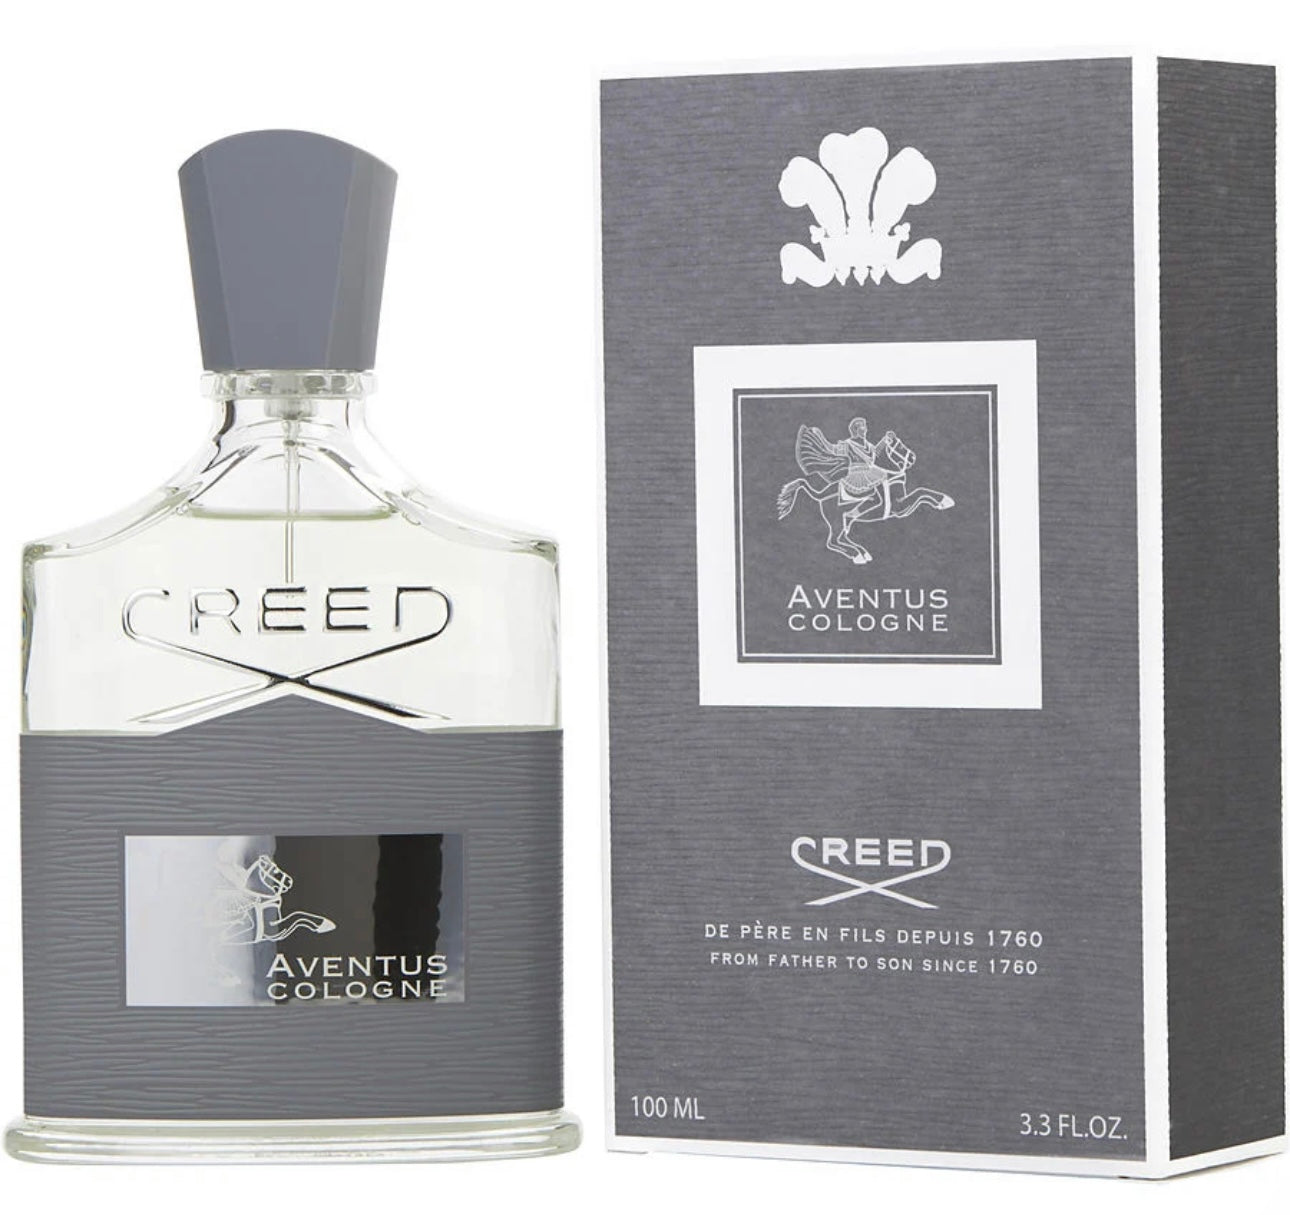 Creed- Aventus Cologne